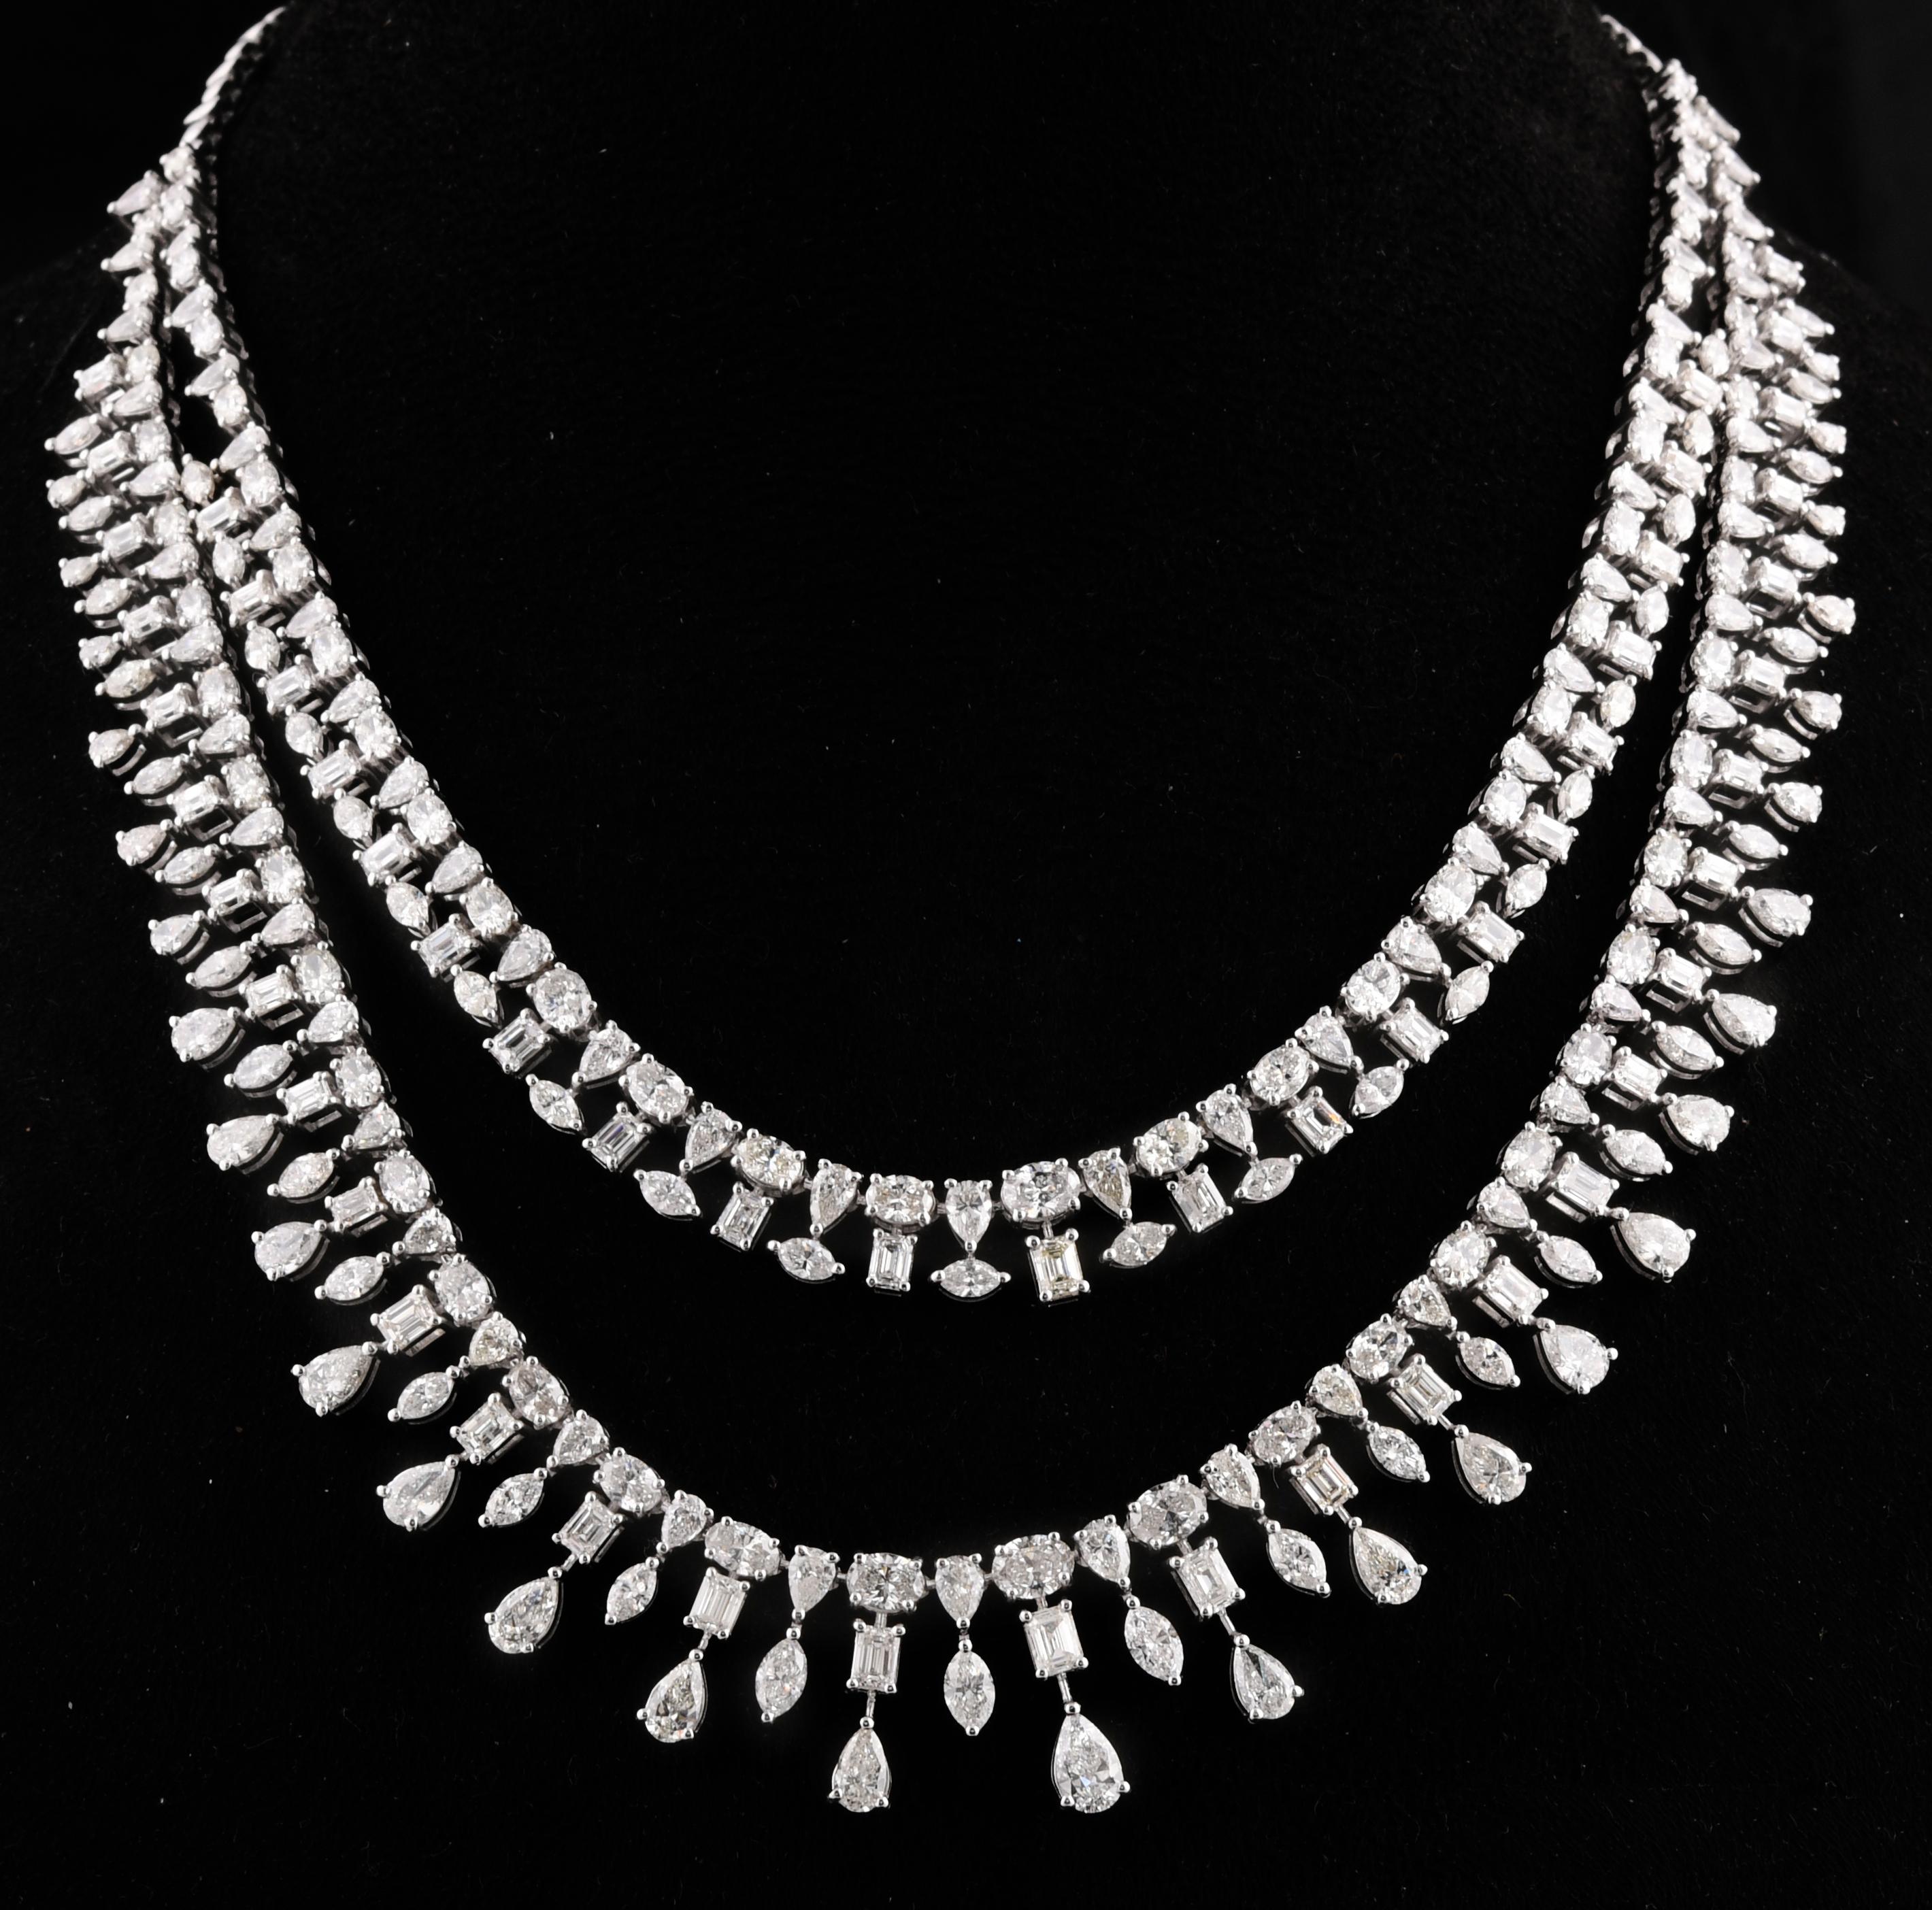 Item Code :- SEN-5842
Gross Wt. :- 73.83 gm
18k Solid White Gold Wt. :- 66.93 gm
Natural Diamond Wt. :- 34.50 Ct. ( AVERAGE DIAMOND CLARITY SI1-SI2 & COLOR H-I )
Necklace Size :- 16 inches Long

✦ Sizing
.....................
We can adjust most